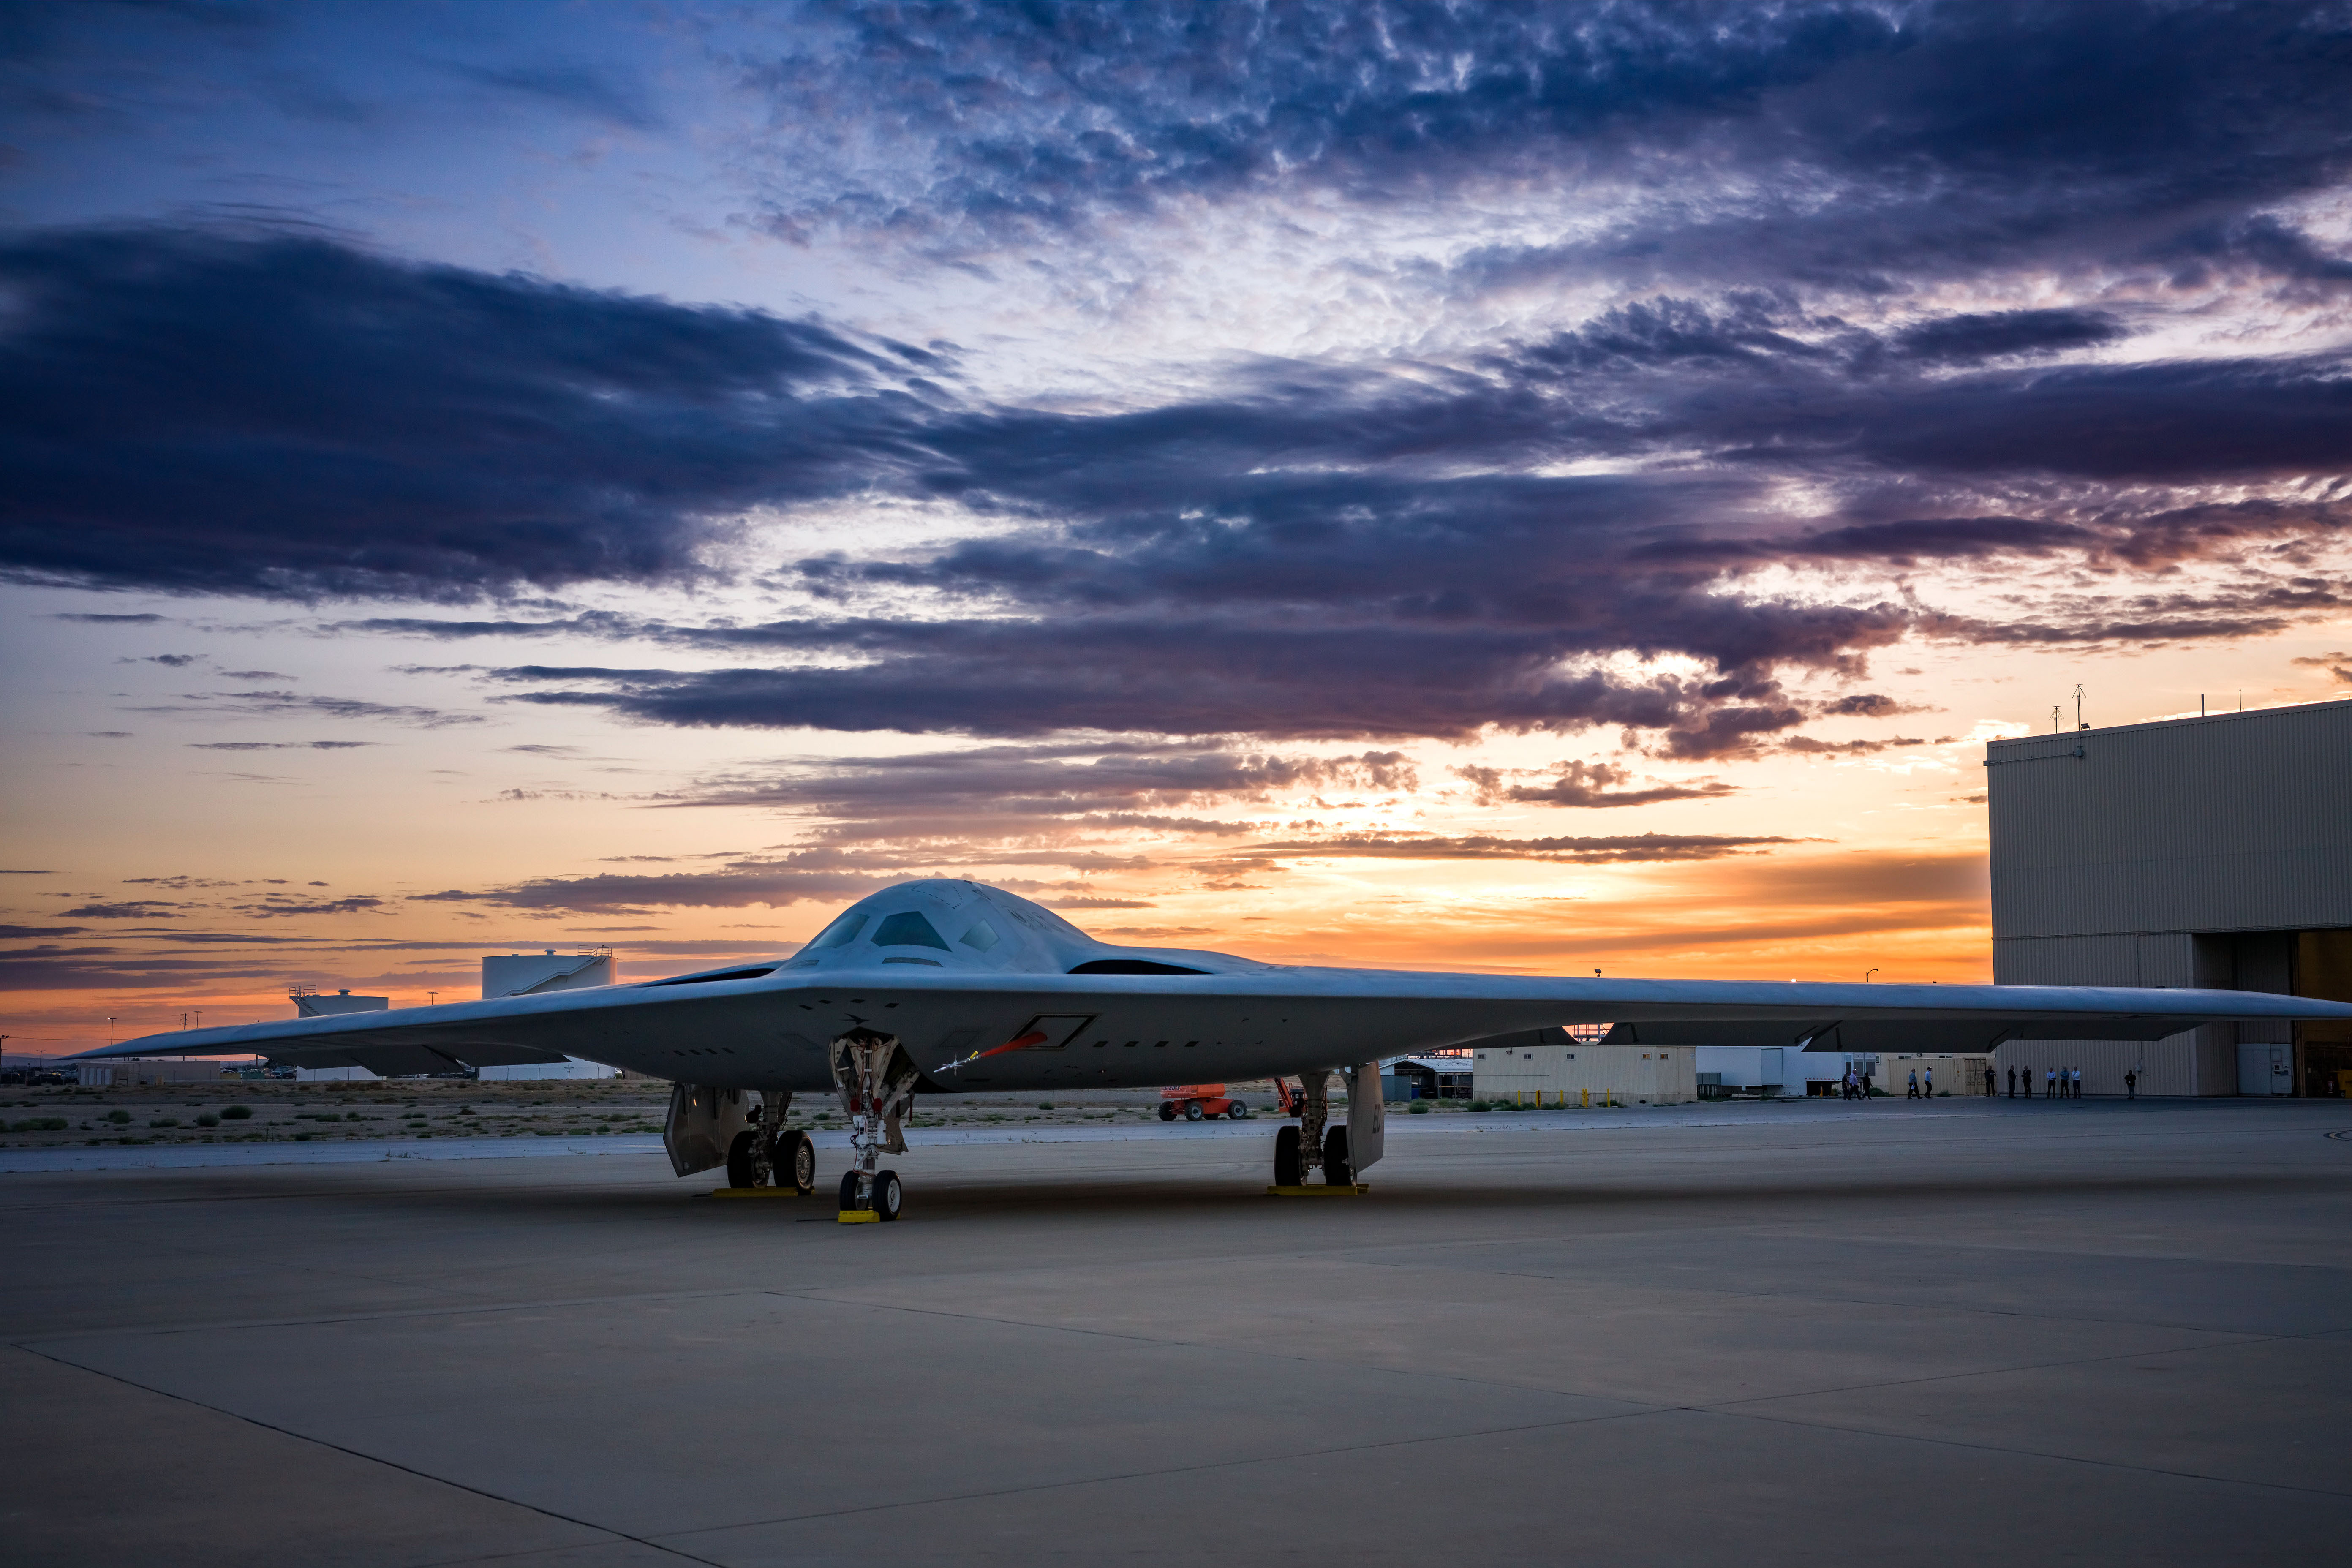 What You Need to Know About Northrop Grumman’s B-21 Raider